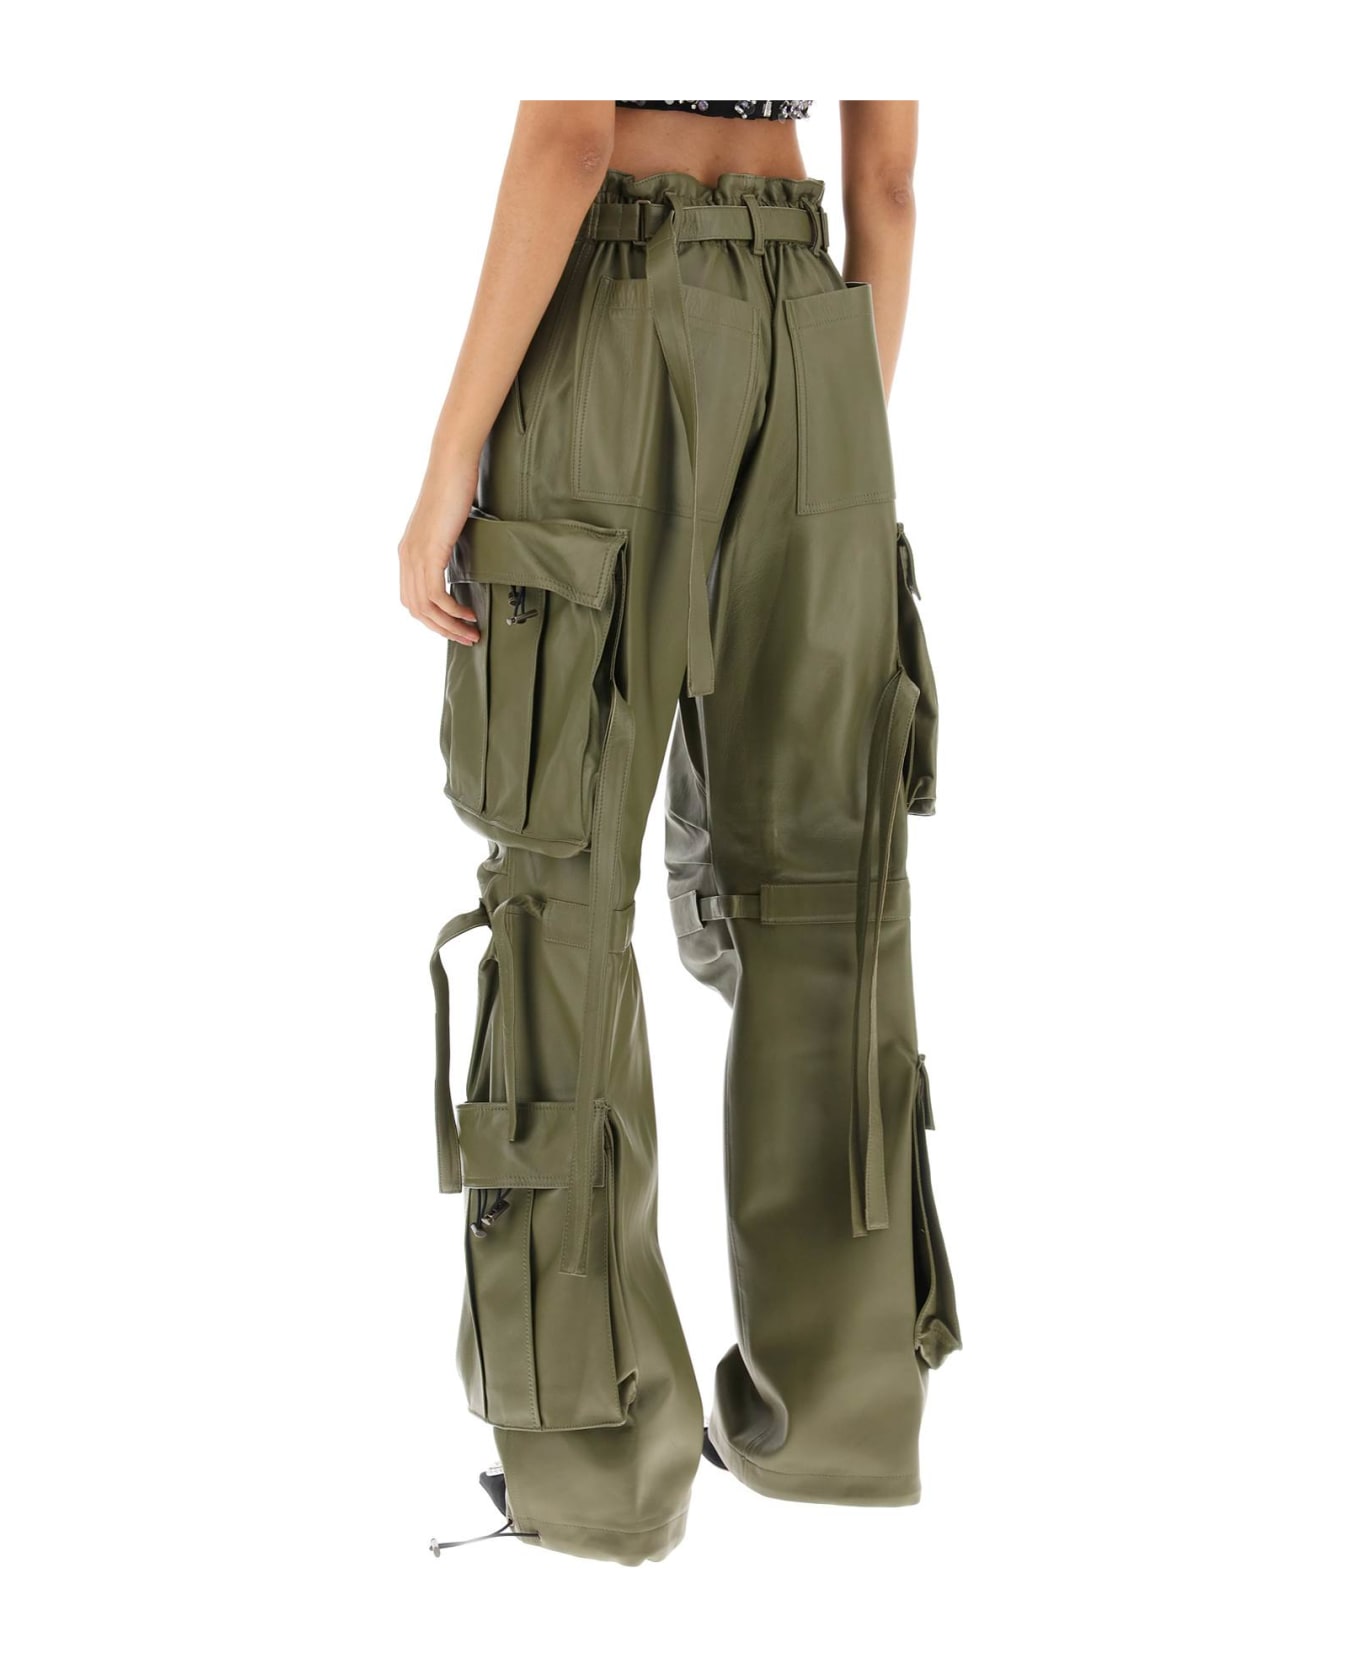 DARKPARK Lilly Cargo Pants In Nappa Leather - OLIVE (Khaki)